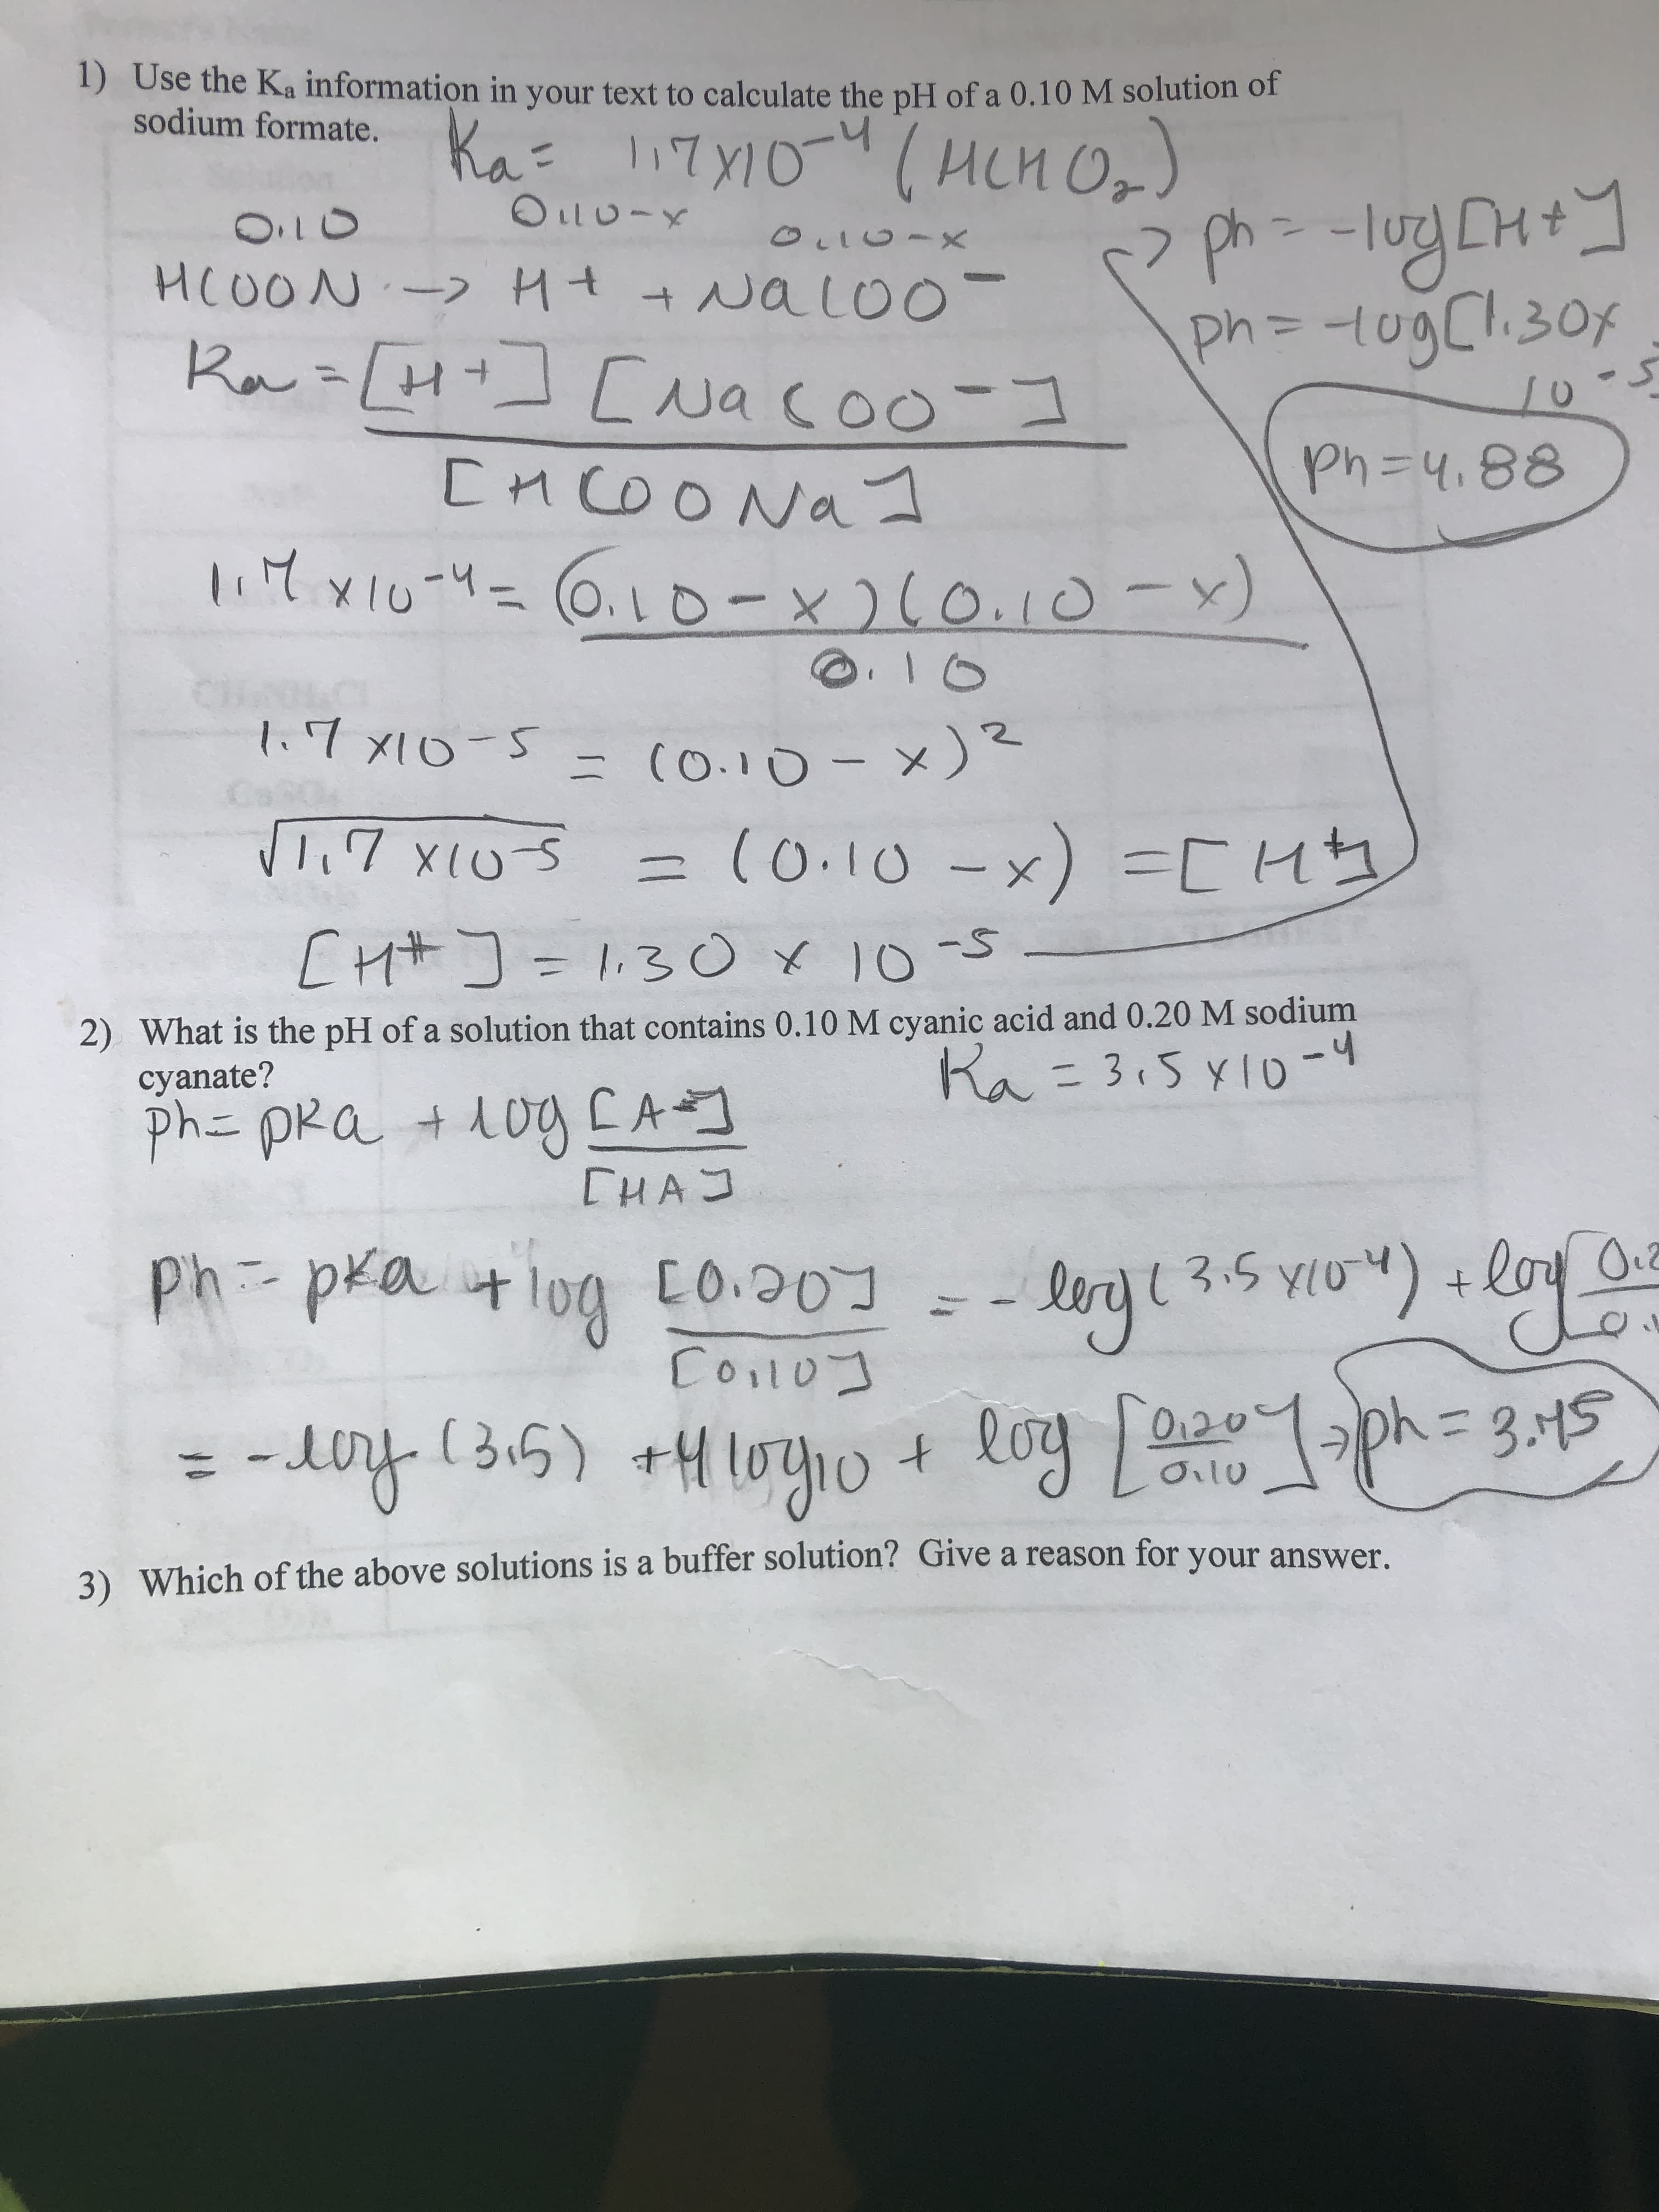 1) Use the Ka information in your text to calculate the pH of a 0.10 M solution of
sodium formate. Ka 17Y10(HCH O,)
131
ph-lug CH+]
ph=D-1ogCl.30x
O.10
HCOON- Ht+ NaL00-
Ra=[H+] [uacoo-I
%3D
Ph=D4,88
[HCOO Na1
lit xiu-4=6.1o-x 1-x)
l.7x1o-5
ニ (0.10- ×)
T.7 x(US
= (0.10 -x) =CHコ
[Hサ]=13○x 10-5
2) What is the pH of a solution that contains 0.10 M cyanic acid and 0.20 M sodium
cyanate?
ph= pRa + d0g CAコ
Ra = 3,5 ylo-4
CHAJ
Ph-pka +log Co.201
Coilo]
ph-pra+log
lenjt 3.5 yio") +loyoy
[0.20]
lery
= -y (3.5) +4 lo4p + loy f020 ph=3,45
- iny (315) +H10yio
log10
O.2०
= 3.45
0i10
3) Which of the above solutions is a buffer solution? Give a reason for your answer.
